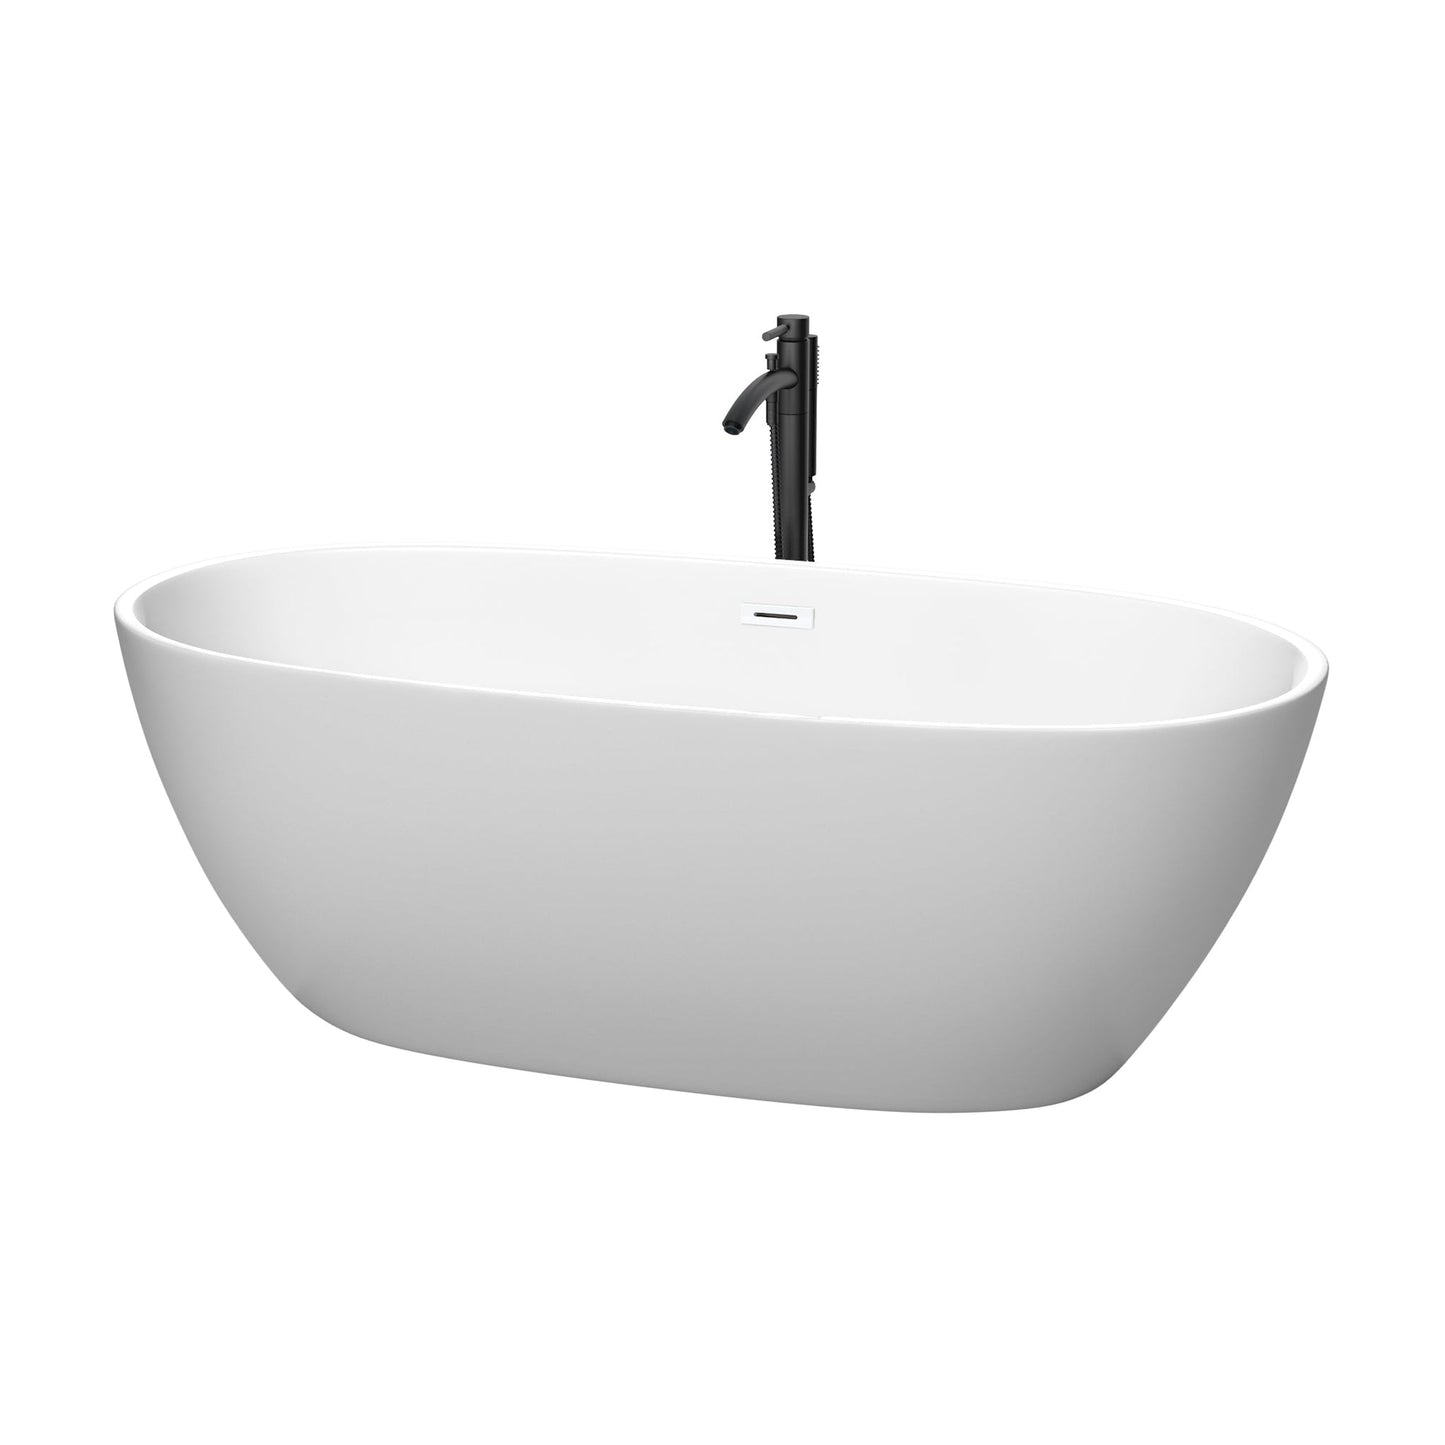 Wyndham Collection Juno 67" Freestanding Bathtub in Matte White With Shiny White Trim and Floor Mounted Faucet in Matte Black